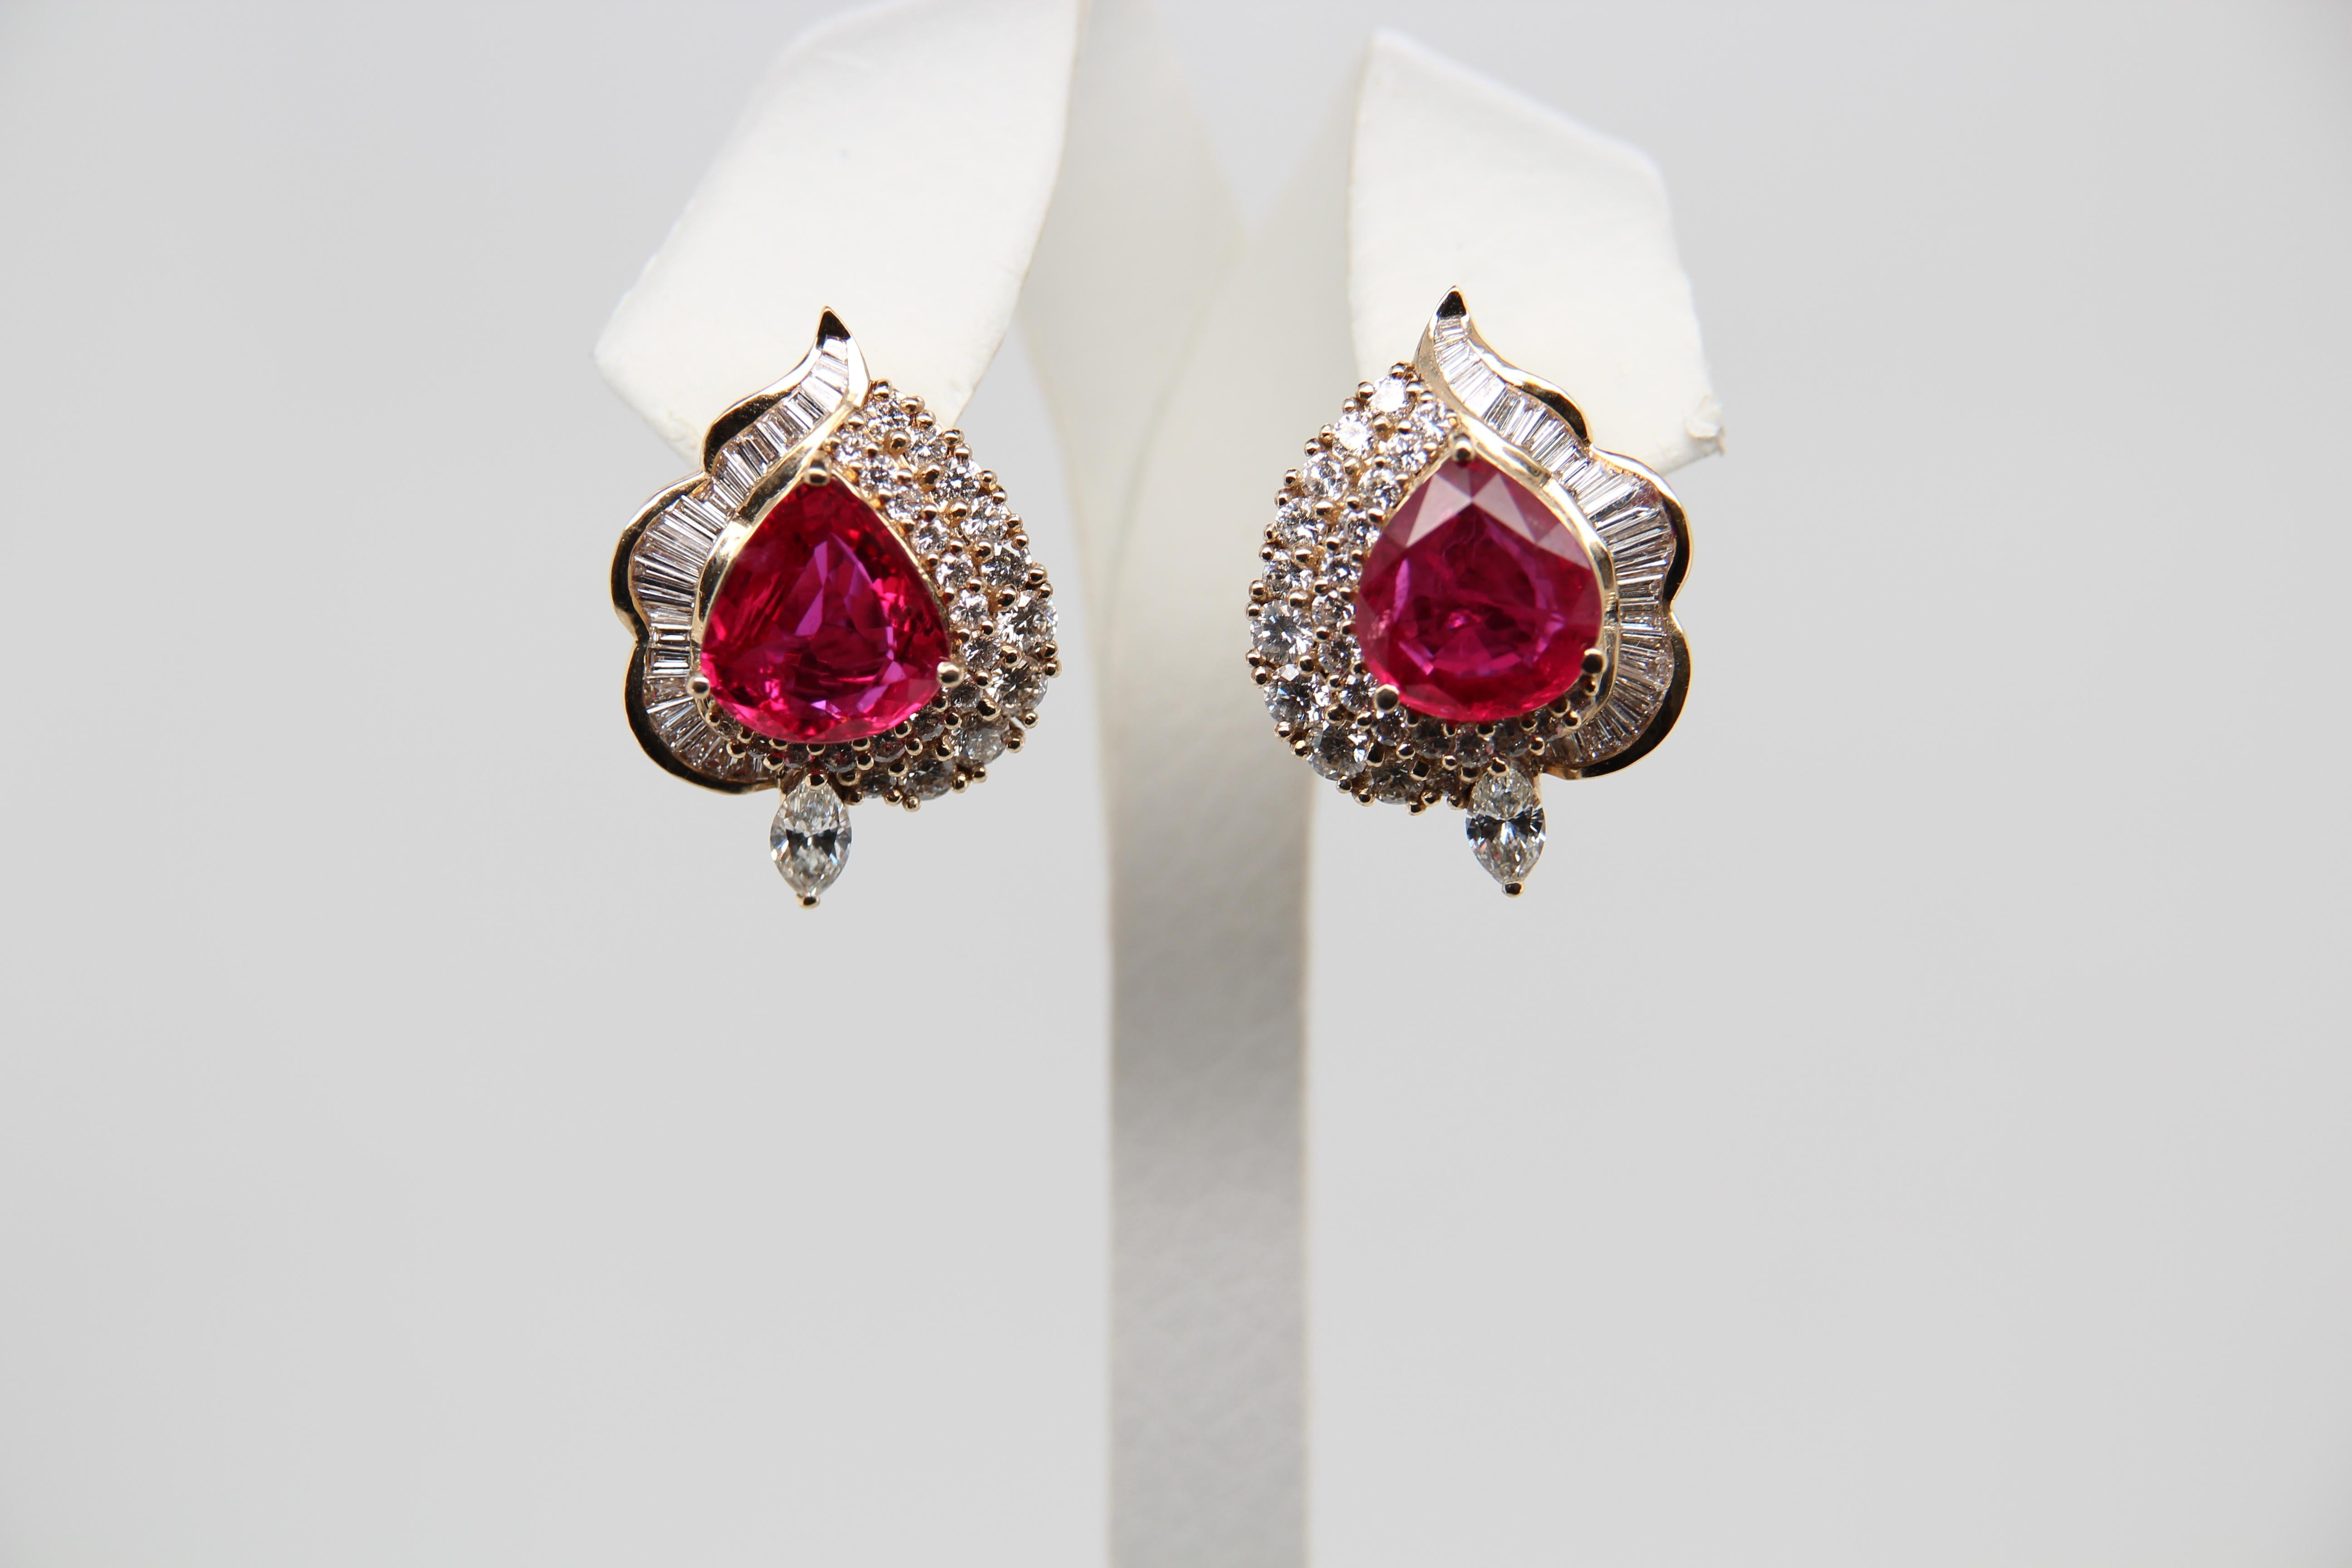 A ruby and diamond earring. The rubies are Thai weighing 3.47 and 3.57 Carat individually as certified by Carat Gem Lab (CGL) surrounded by 2.61 Carat diamonds. The earring is made in 18k white gold gross weight 17.44 g.